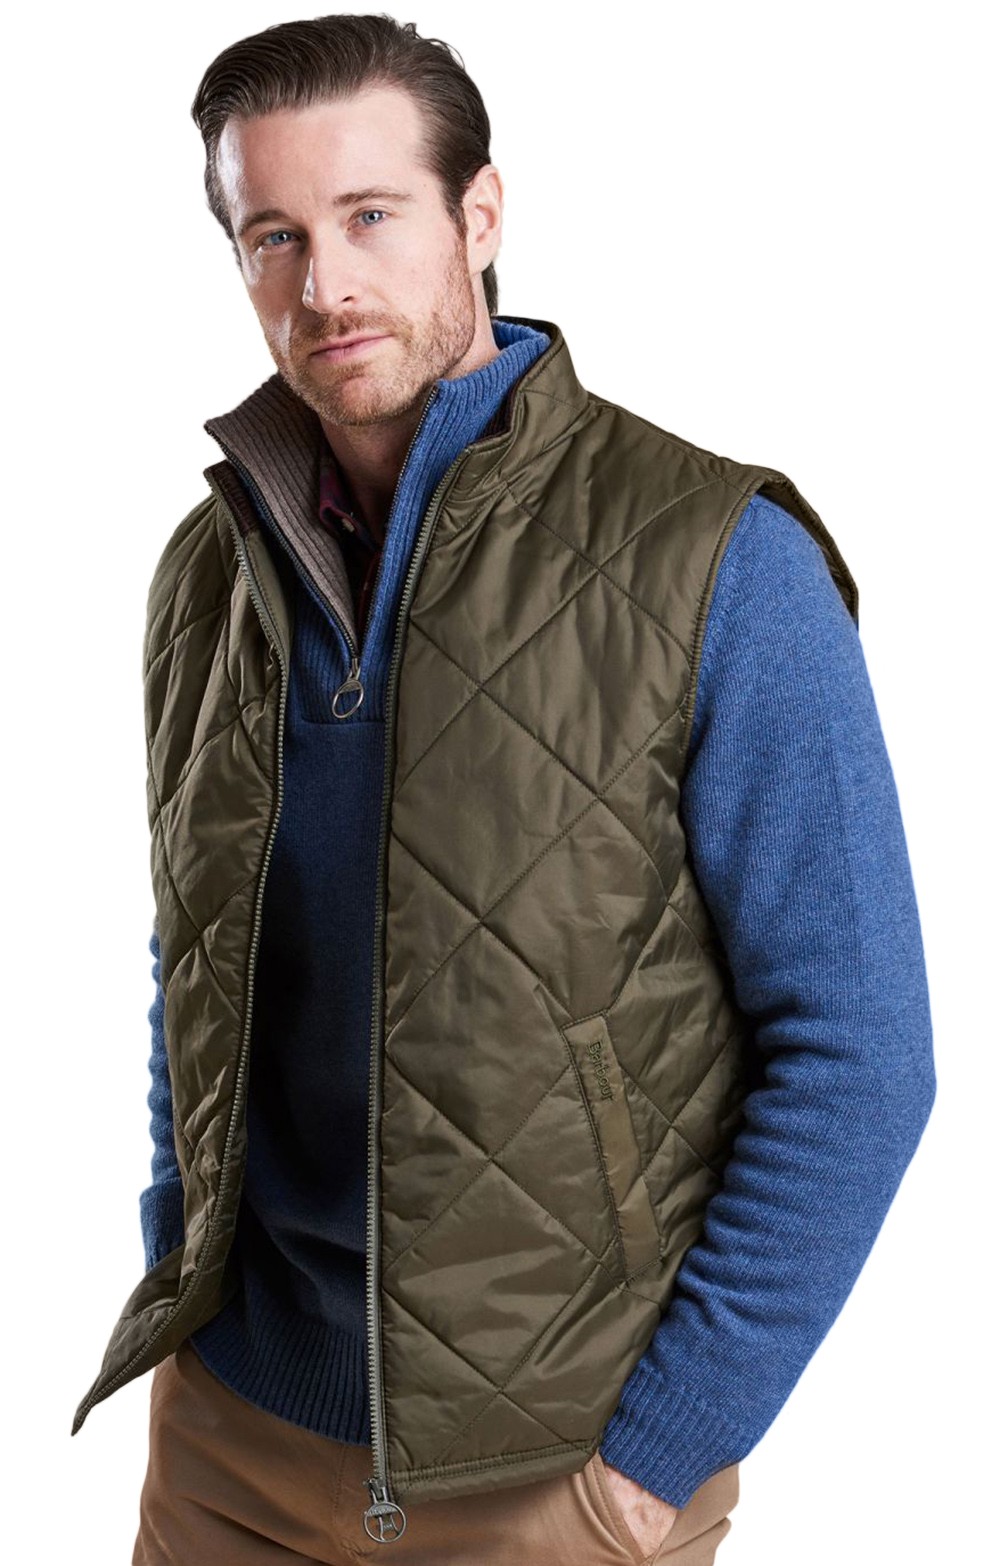 barbour padded gilet